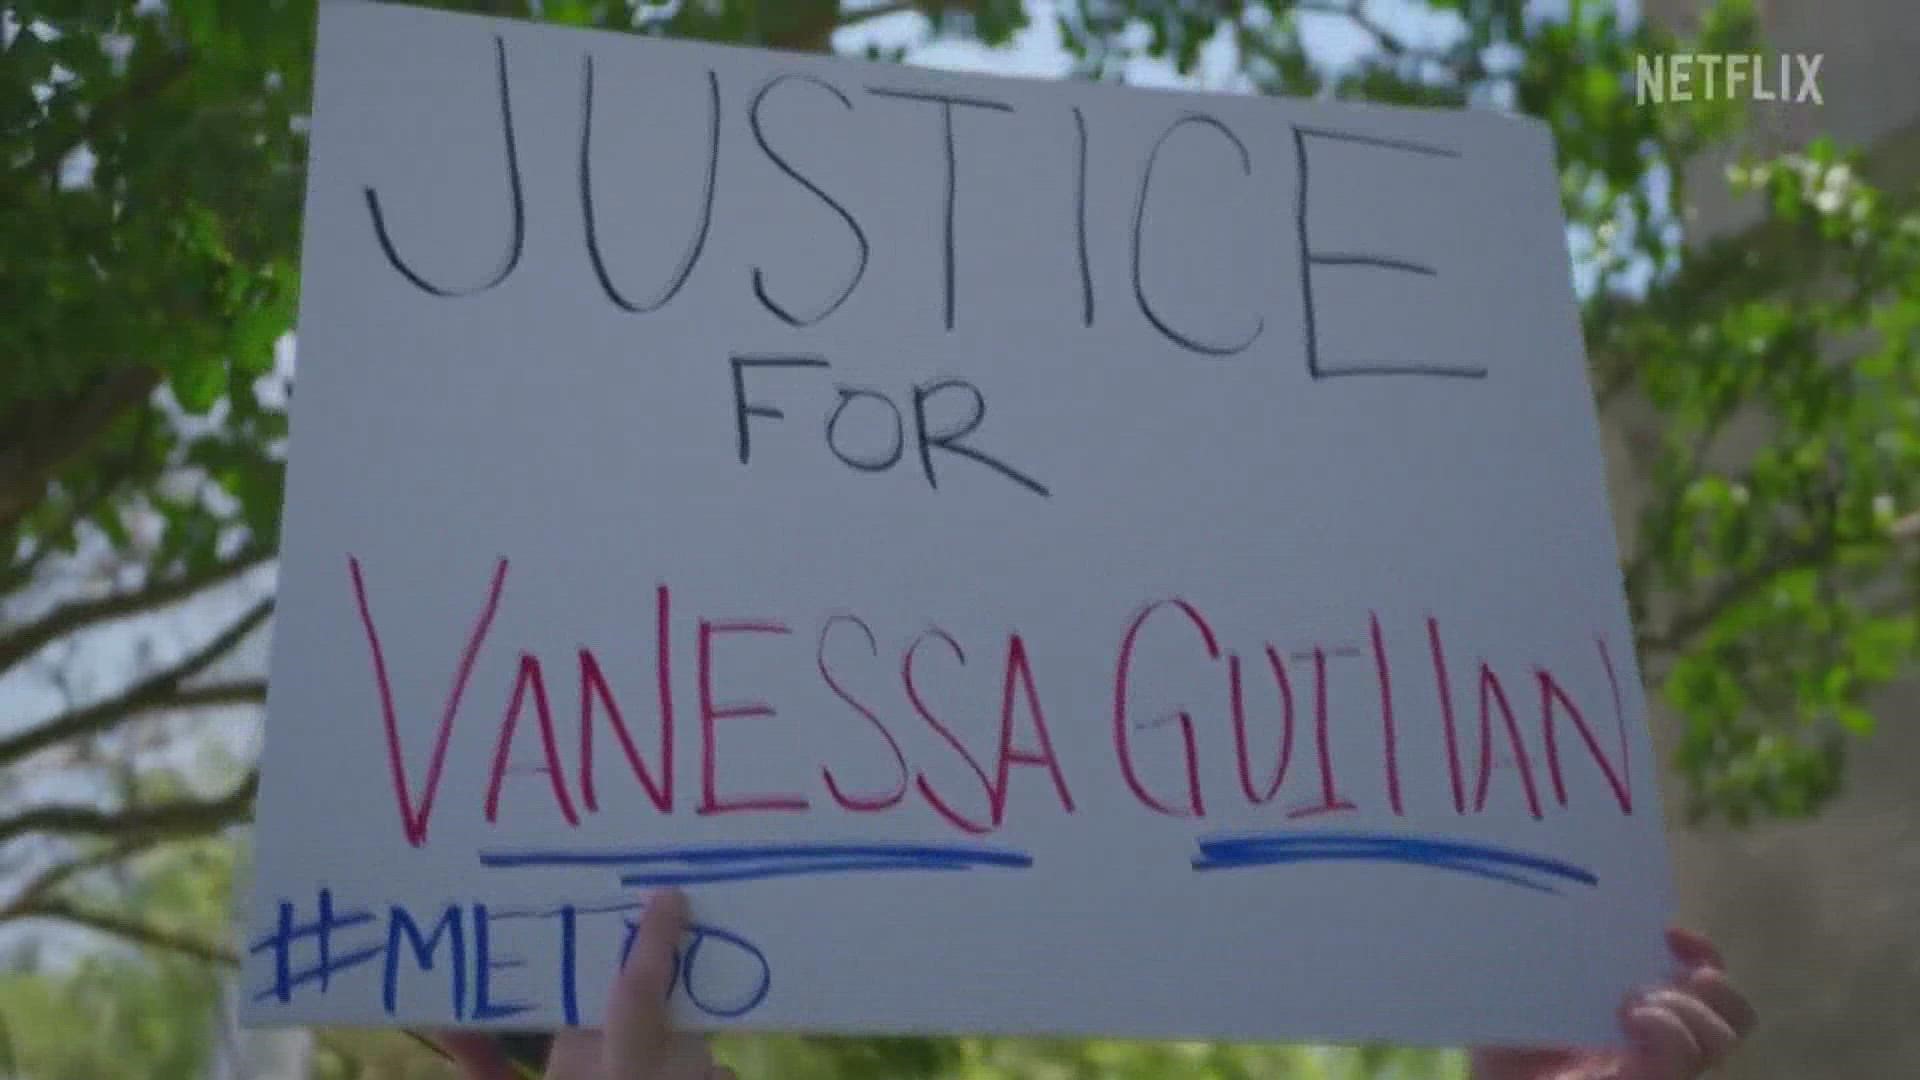 This Netflix documentary zeros in on the family's journey to get justice for Vanessa Guillen.